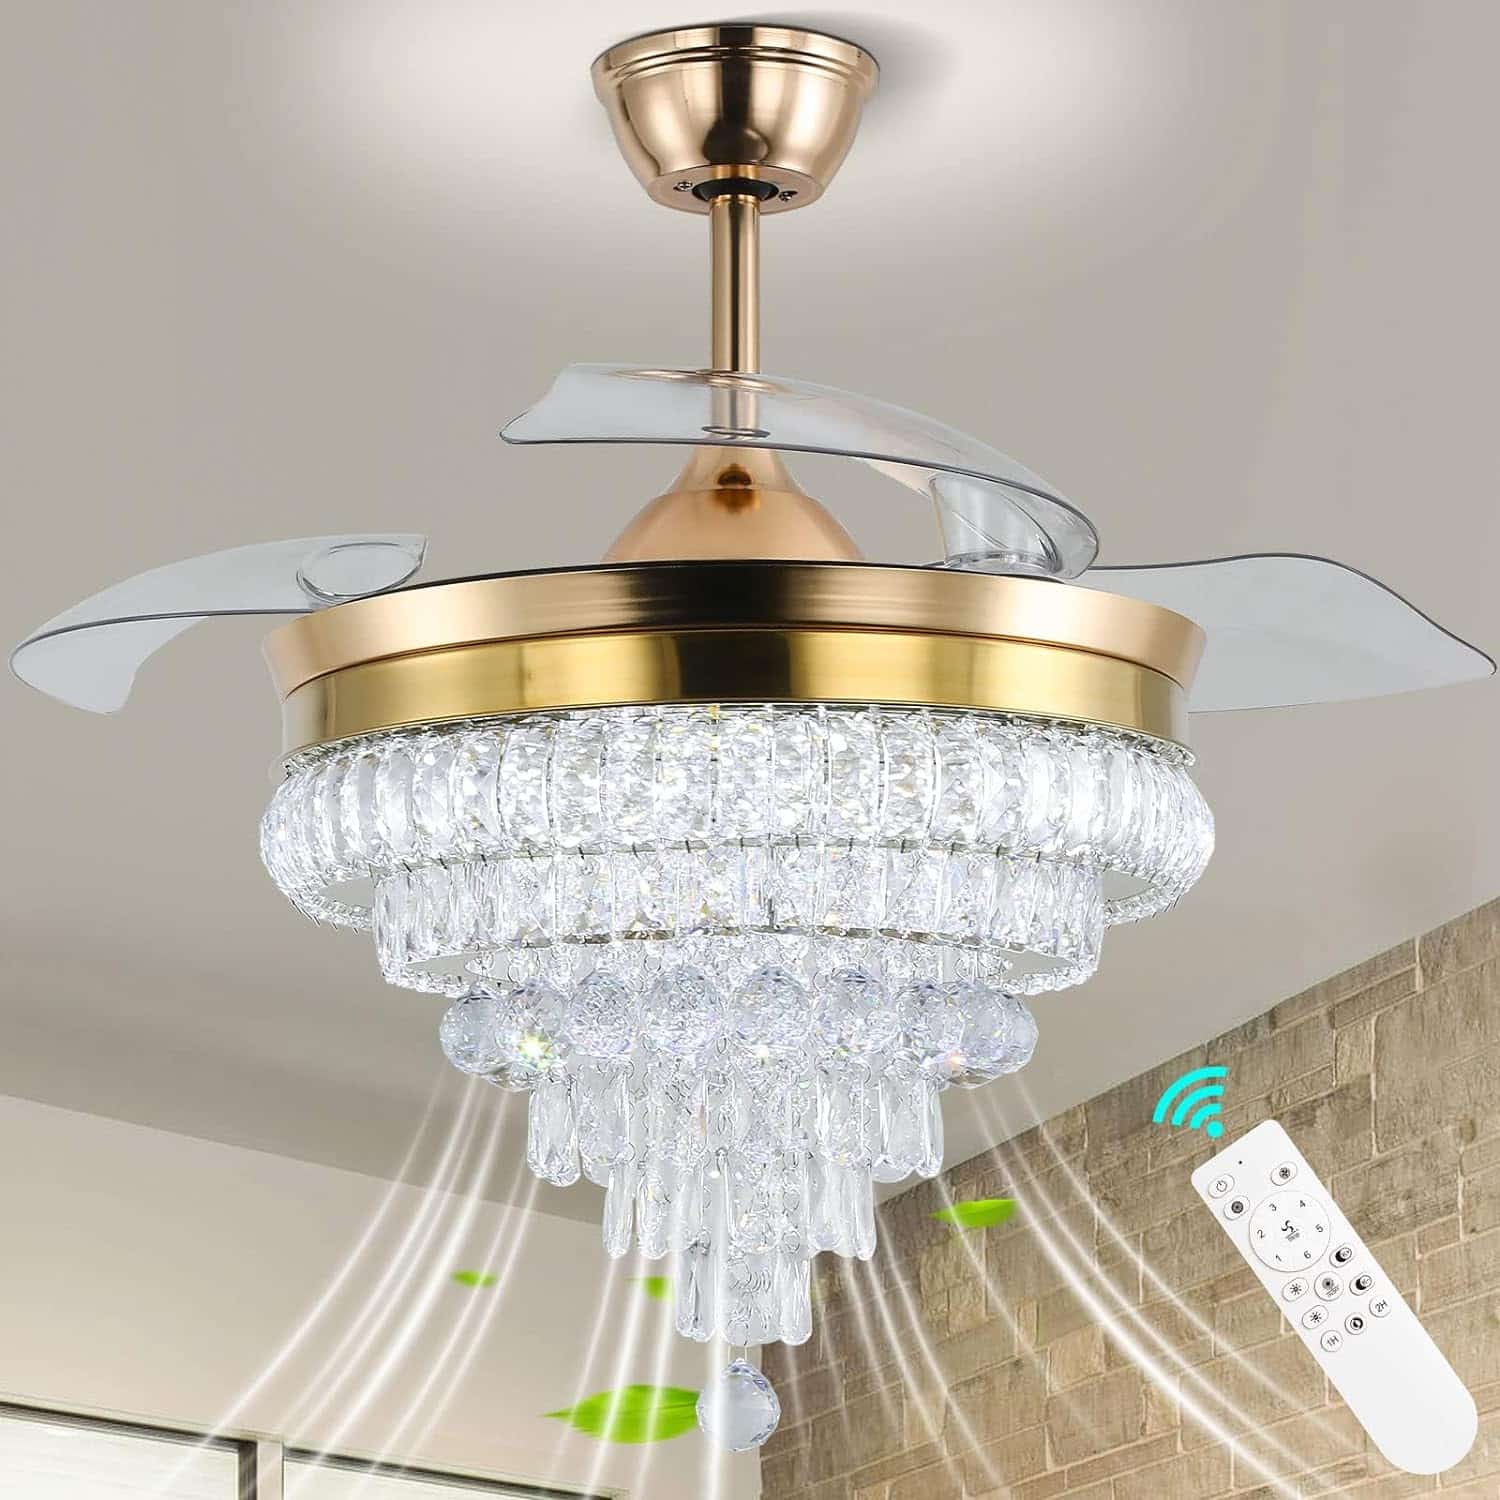 CLAIRDAI Modern Crystal Chandelier Ceiling Fan with Lights Dimmable Fandeliers 42 Retractable LED Invisible Fandelier Crystal Chandelier Fan for Bedroom Dining Room Living Room (Gold)